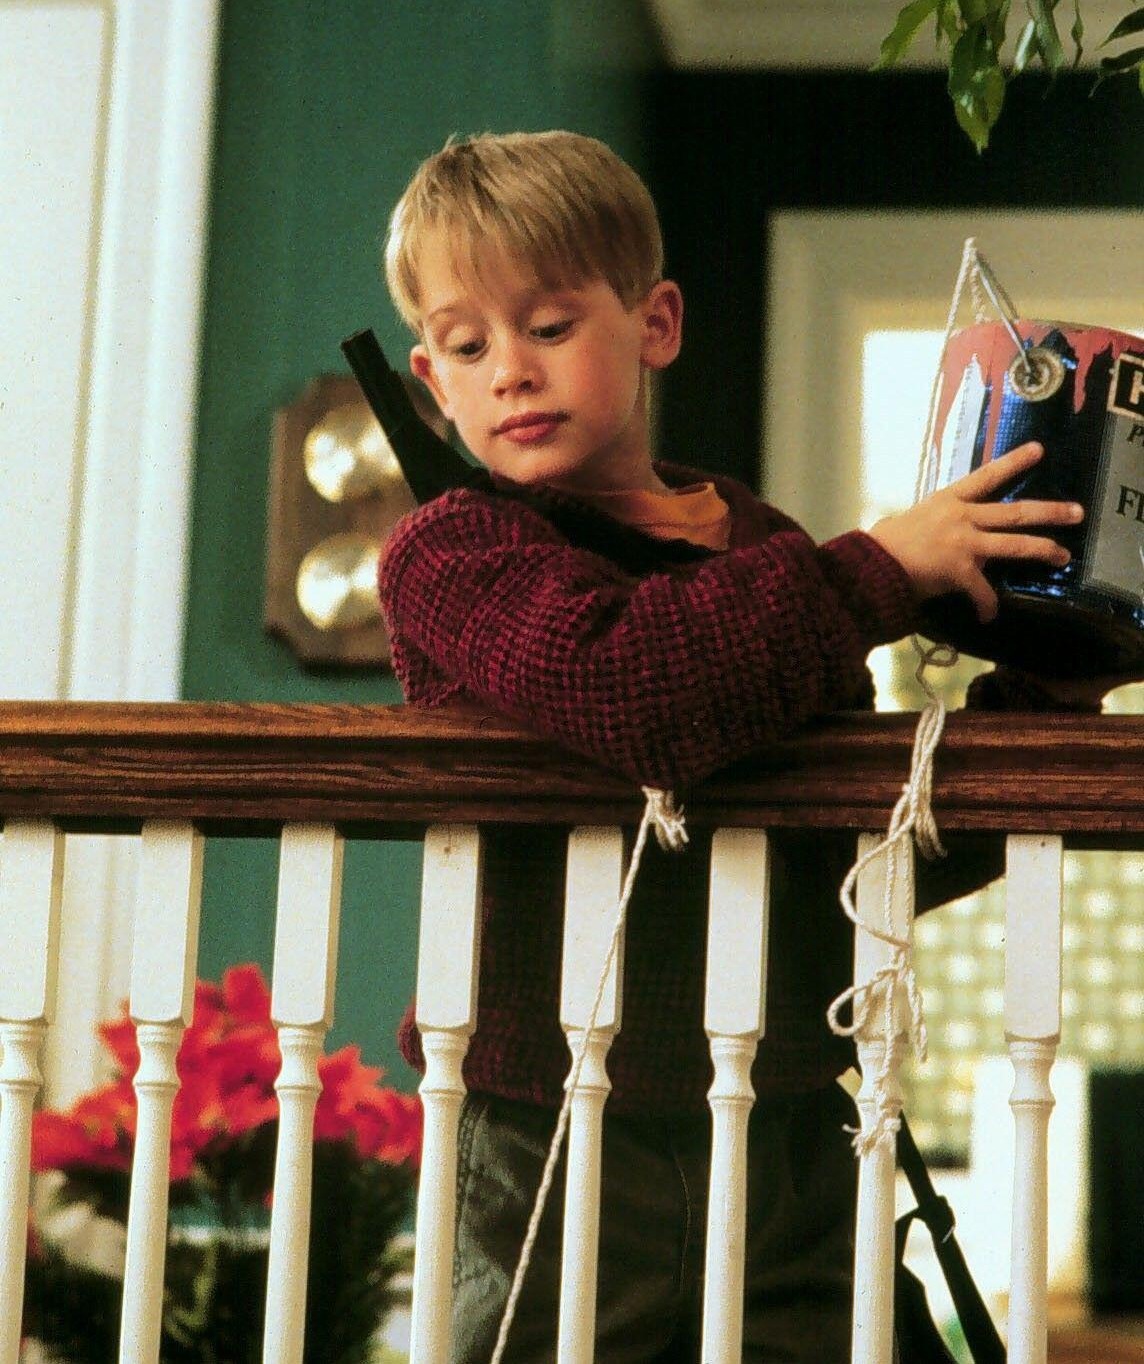 I recreated Kevin’s brutal burglar traps in Home Alone – and was utterly horrified by what would happen in real-life